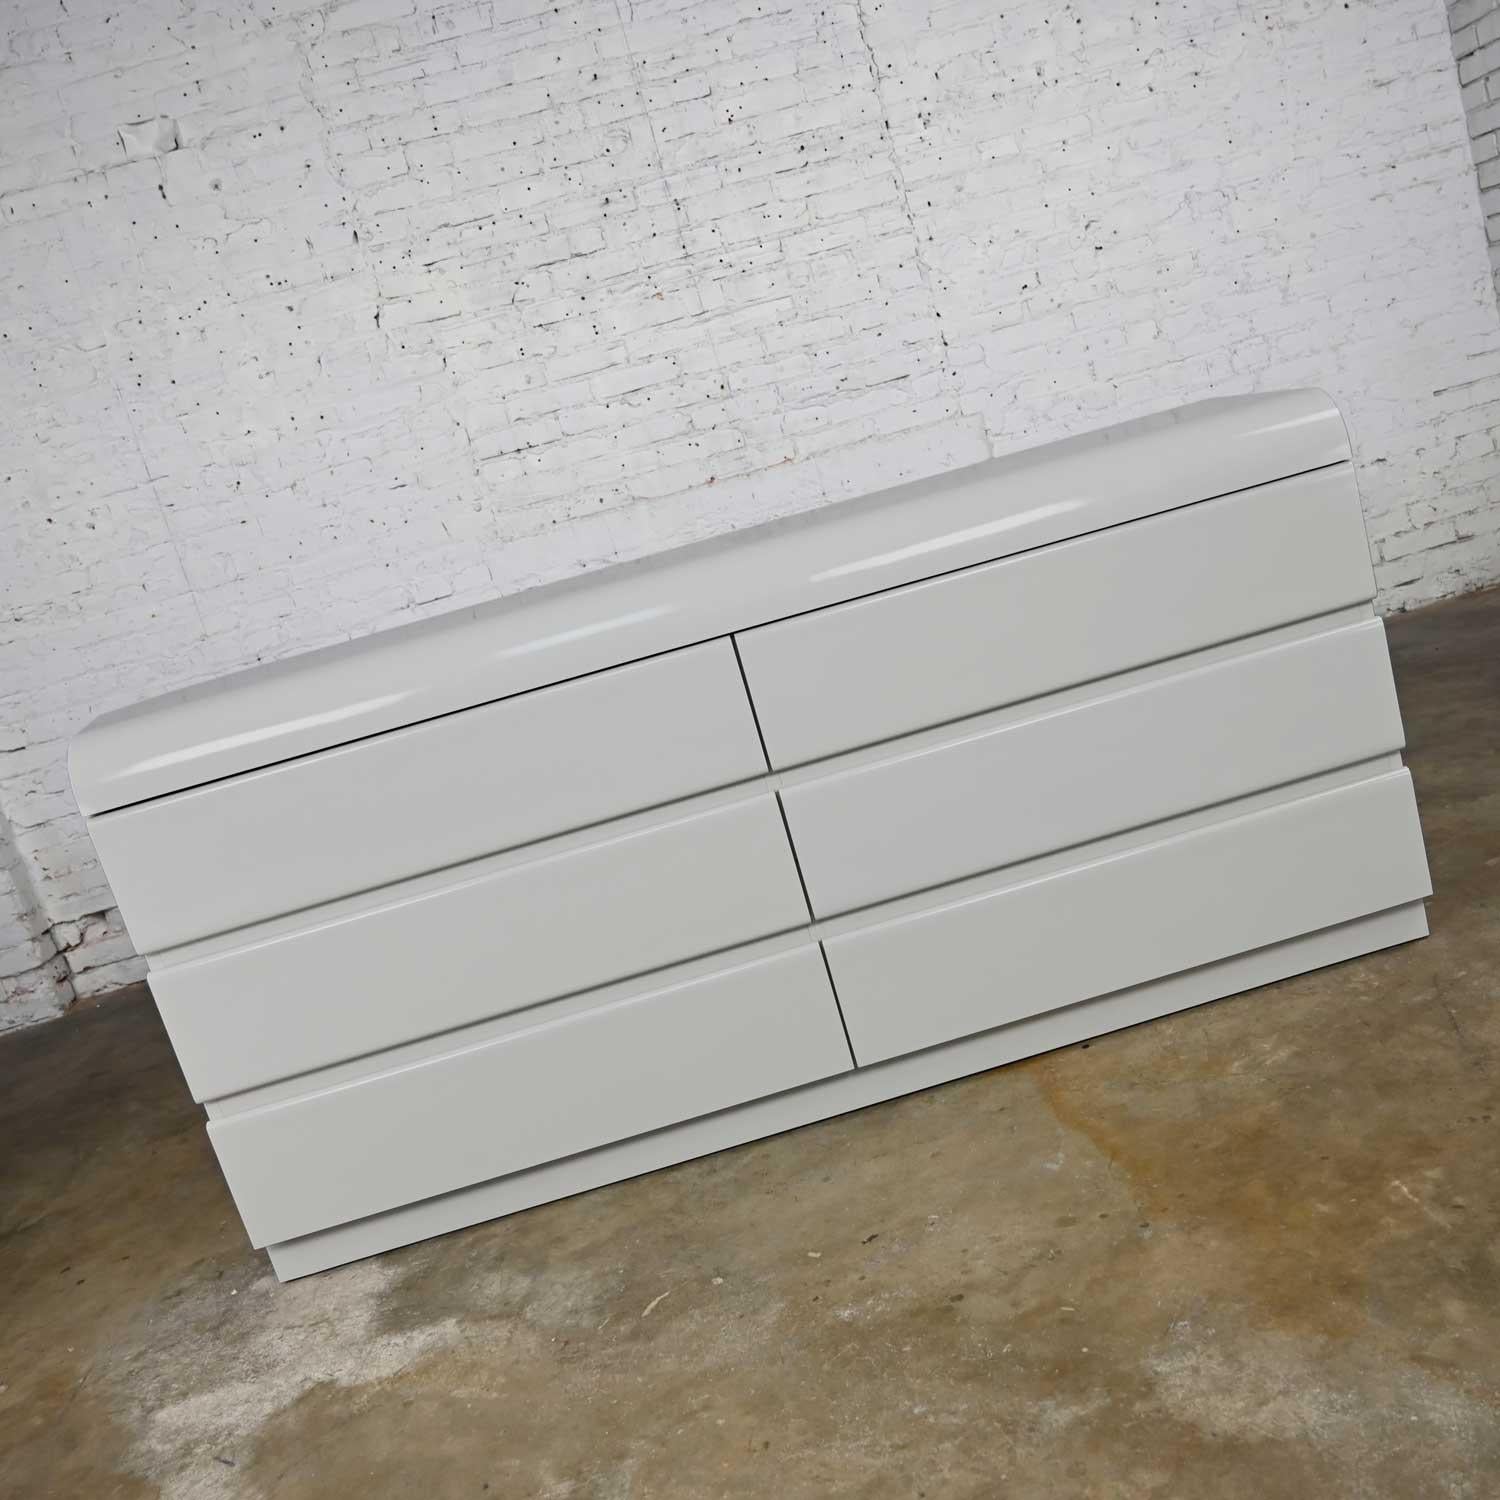 Fabulous modern to postmodern light gray laminate clad high-density fiberboard six drawer custom built dresser by Center Displays Custom Furniture and Cabinets of KCMO. Somewhat in the style of designs by both Milo Baughman and Karl Springer and